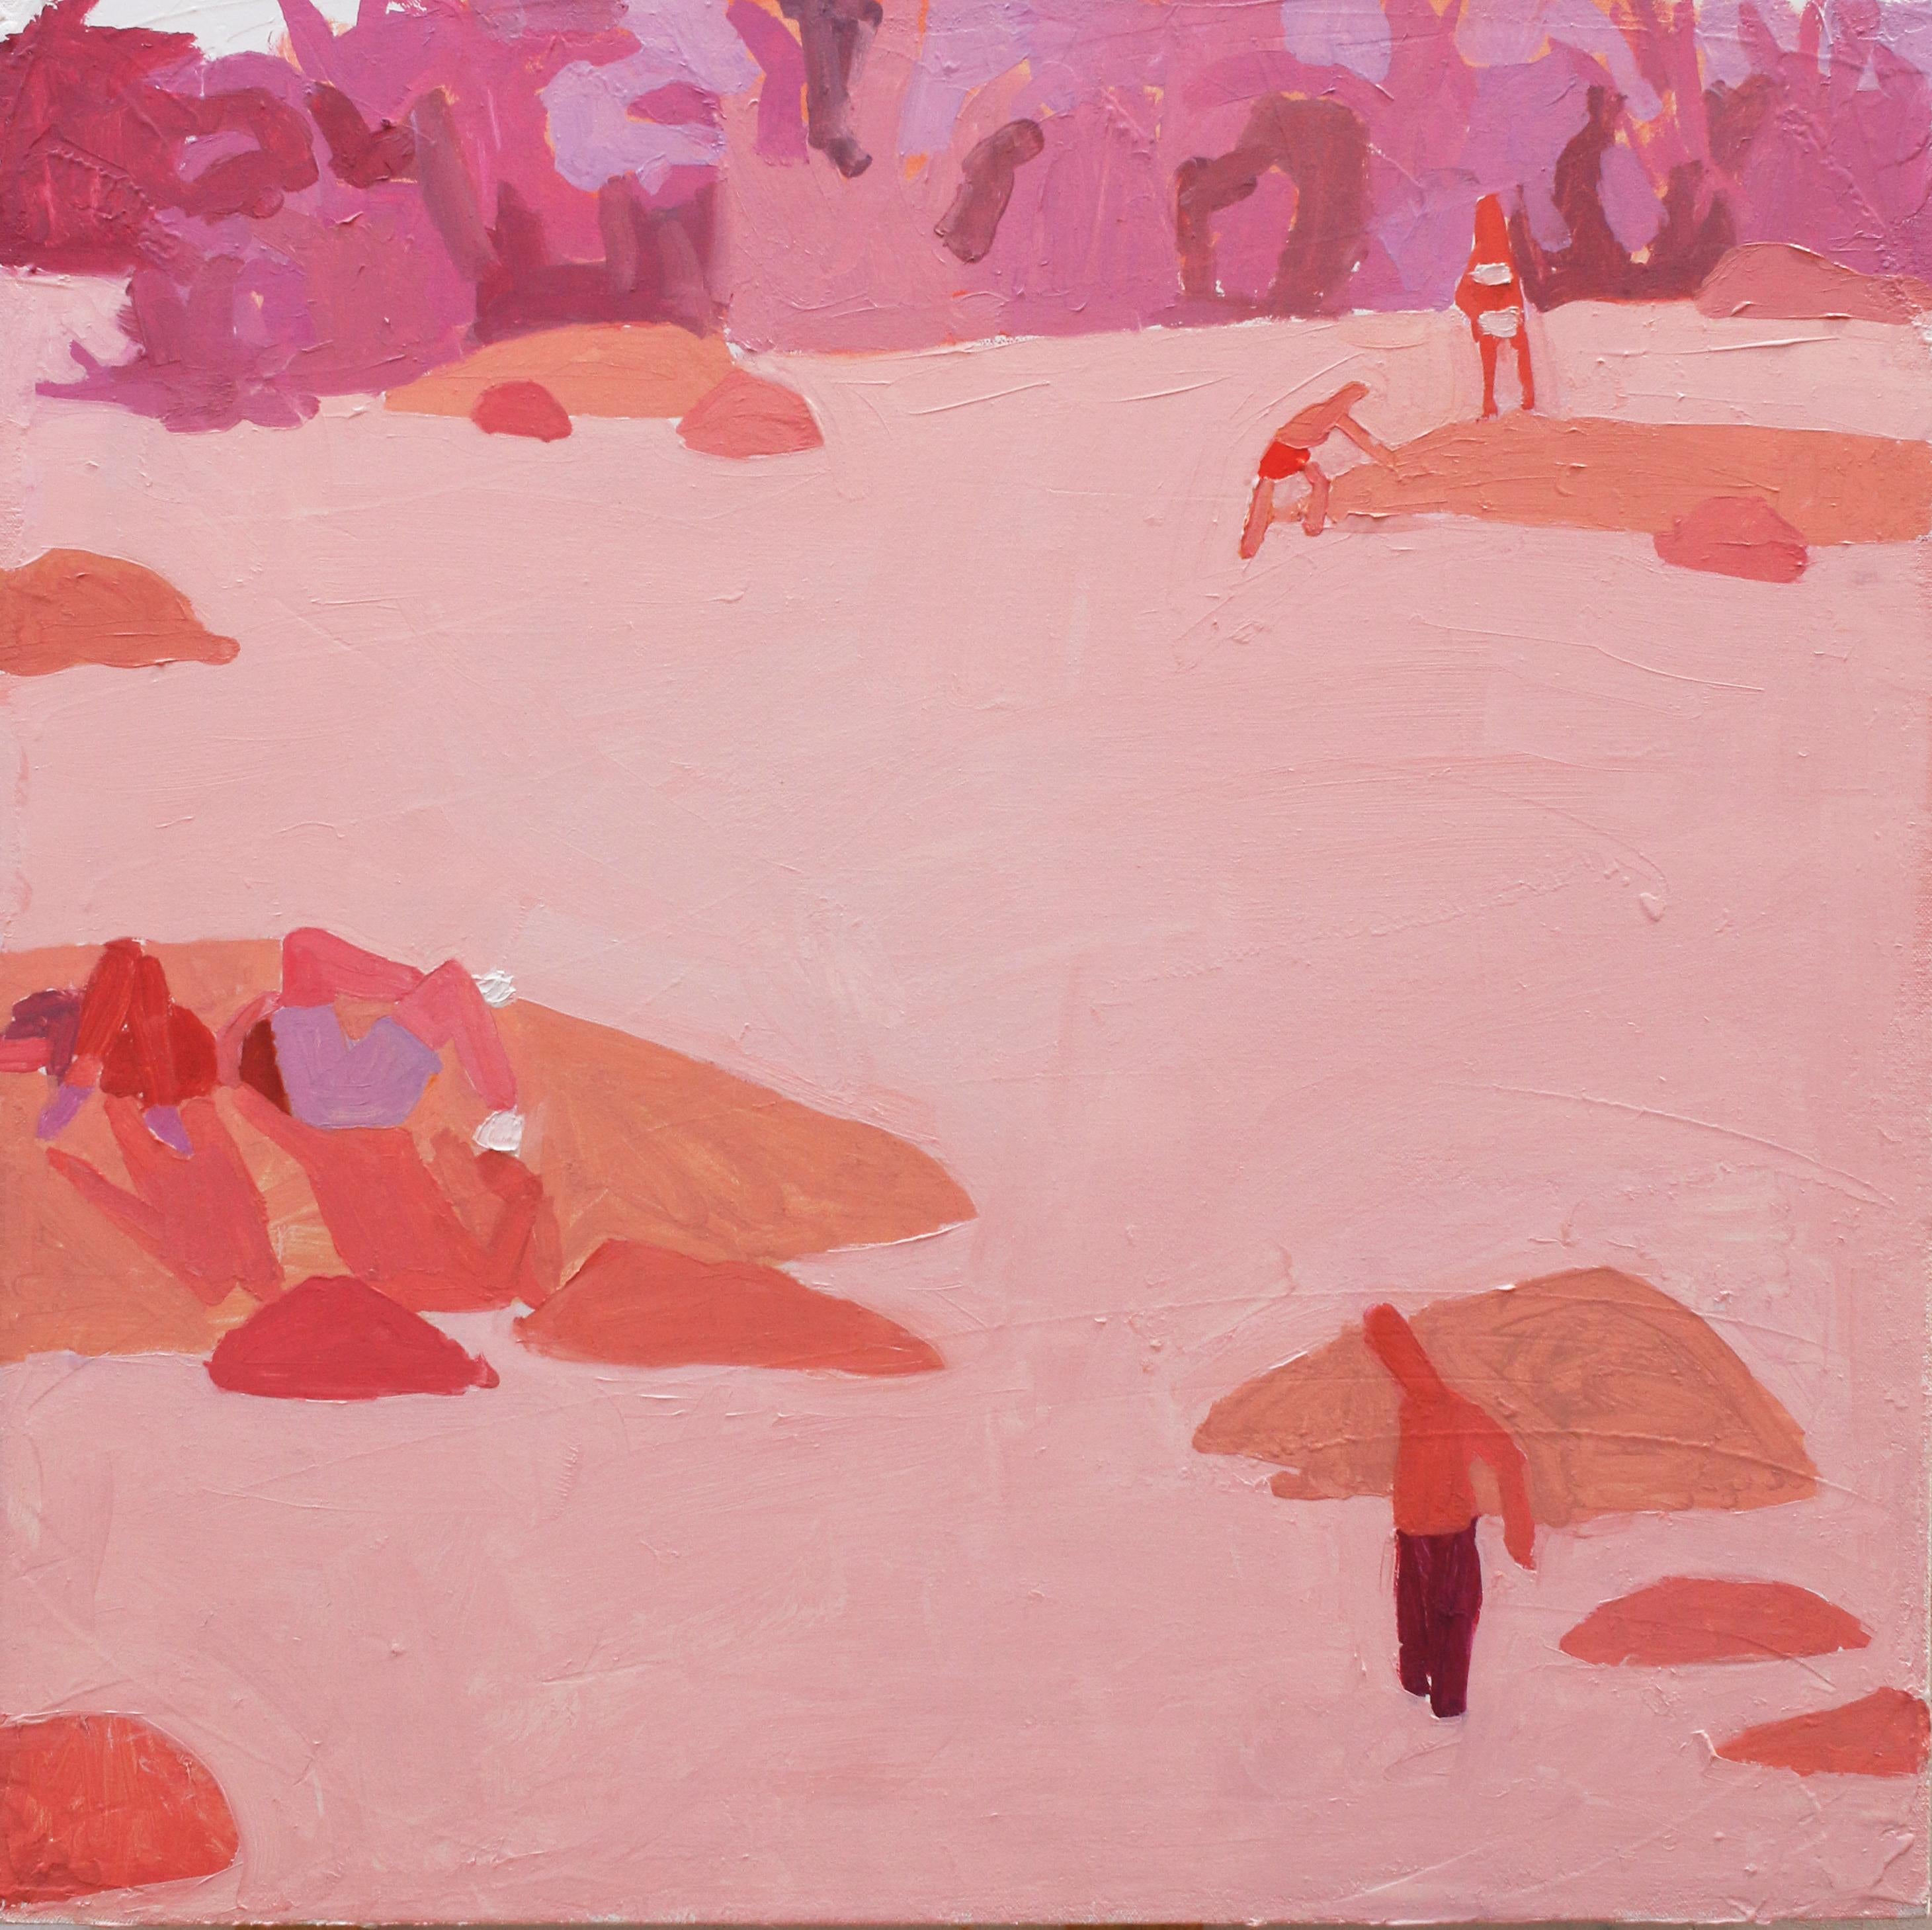 Sophie Treppendahl Figurative Painting - Rose James, Swimmers in River, Summer Landscape in Pinks, Red and Peach